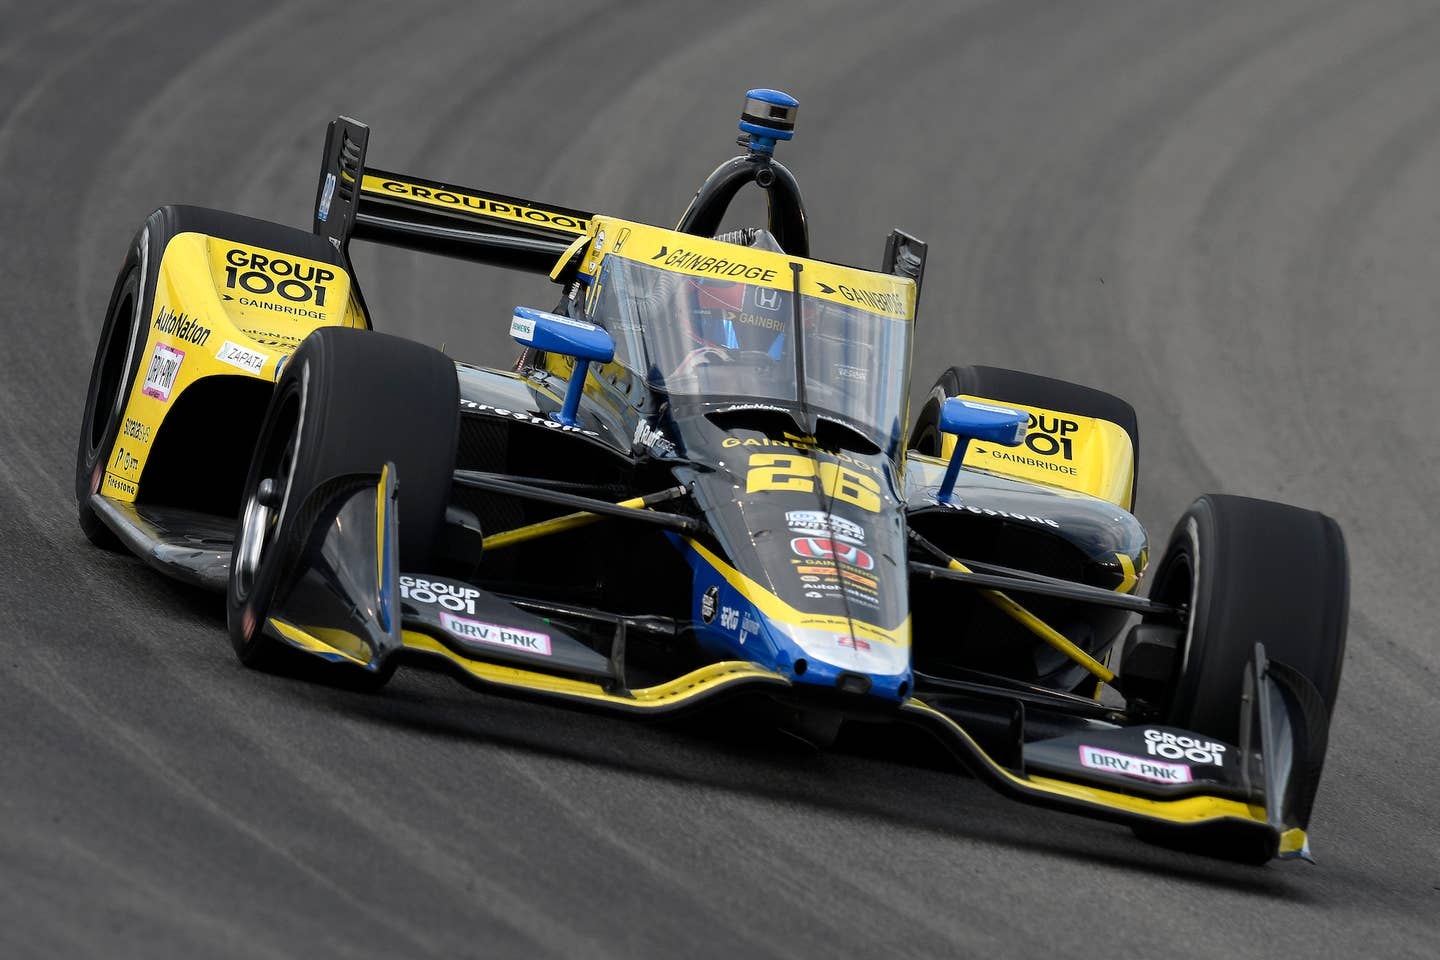 MADISON, IL - AUGUST 20: Colton Herta (#26 Andretti Autosport) drives through turn four during the NTT IndyCar Series Bommarito Automotive Group 500 on August 20, 2022, at World Wide Technology Raceway at Gateway in Madison, Illinois. (Photo by Michael Allio/Icon Sportswire via Getty Images)